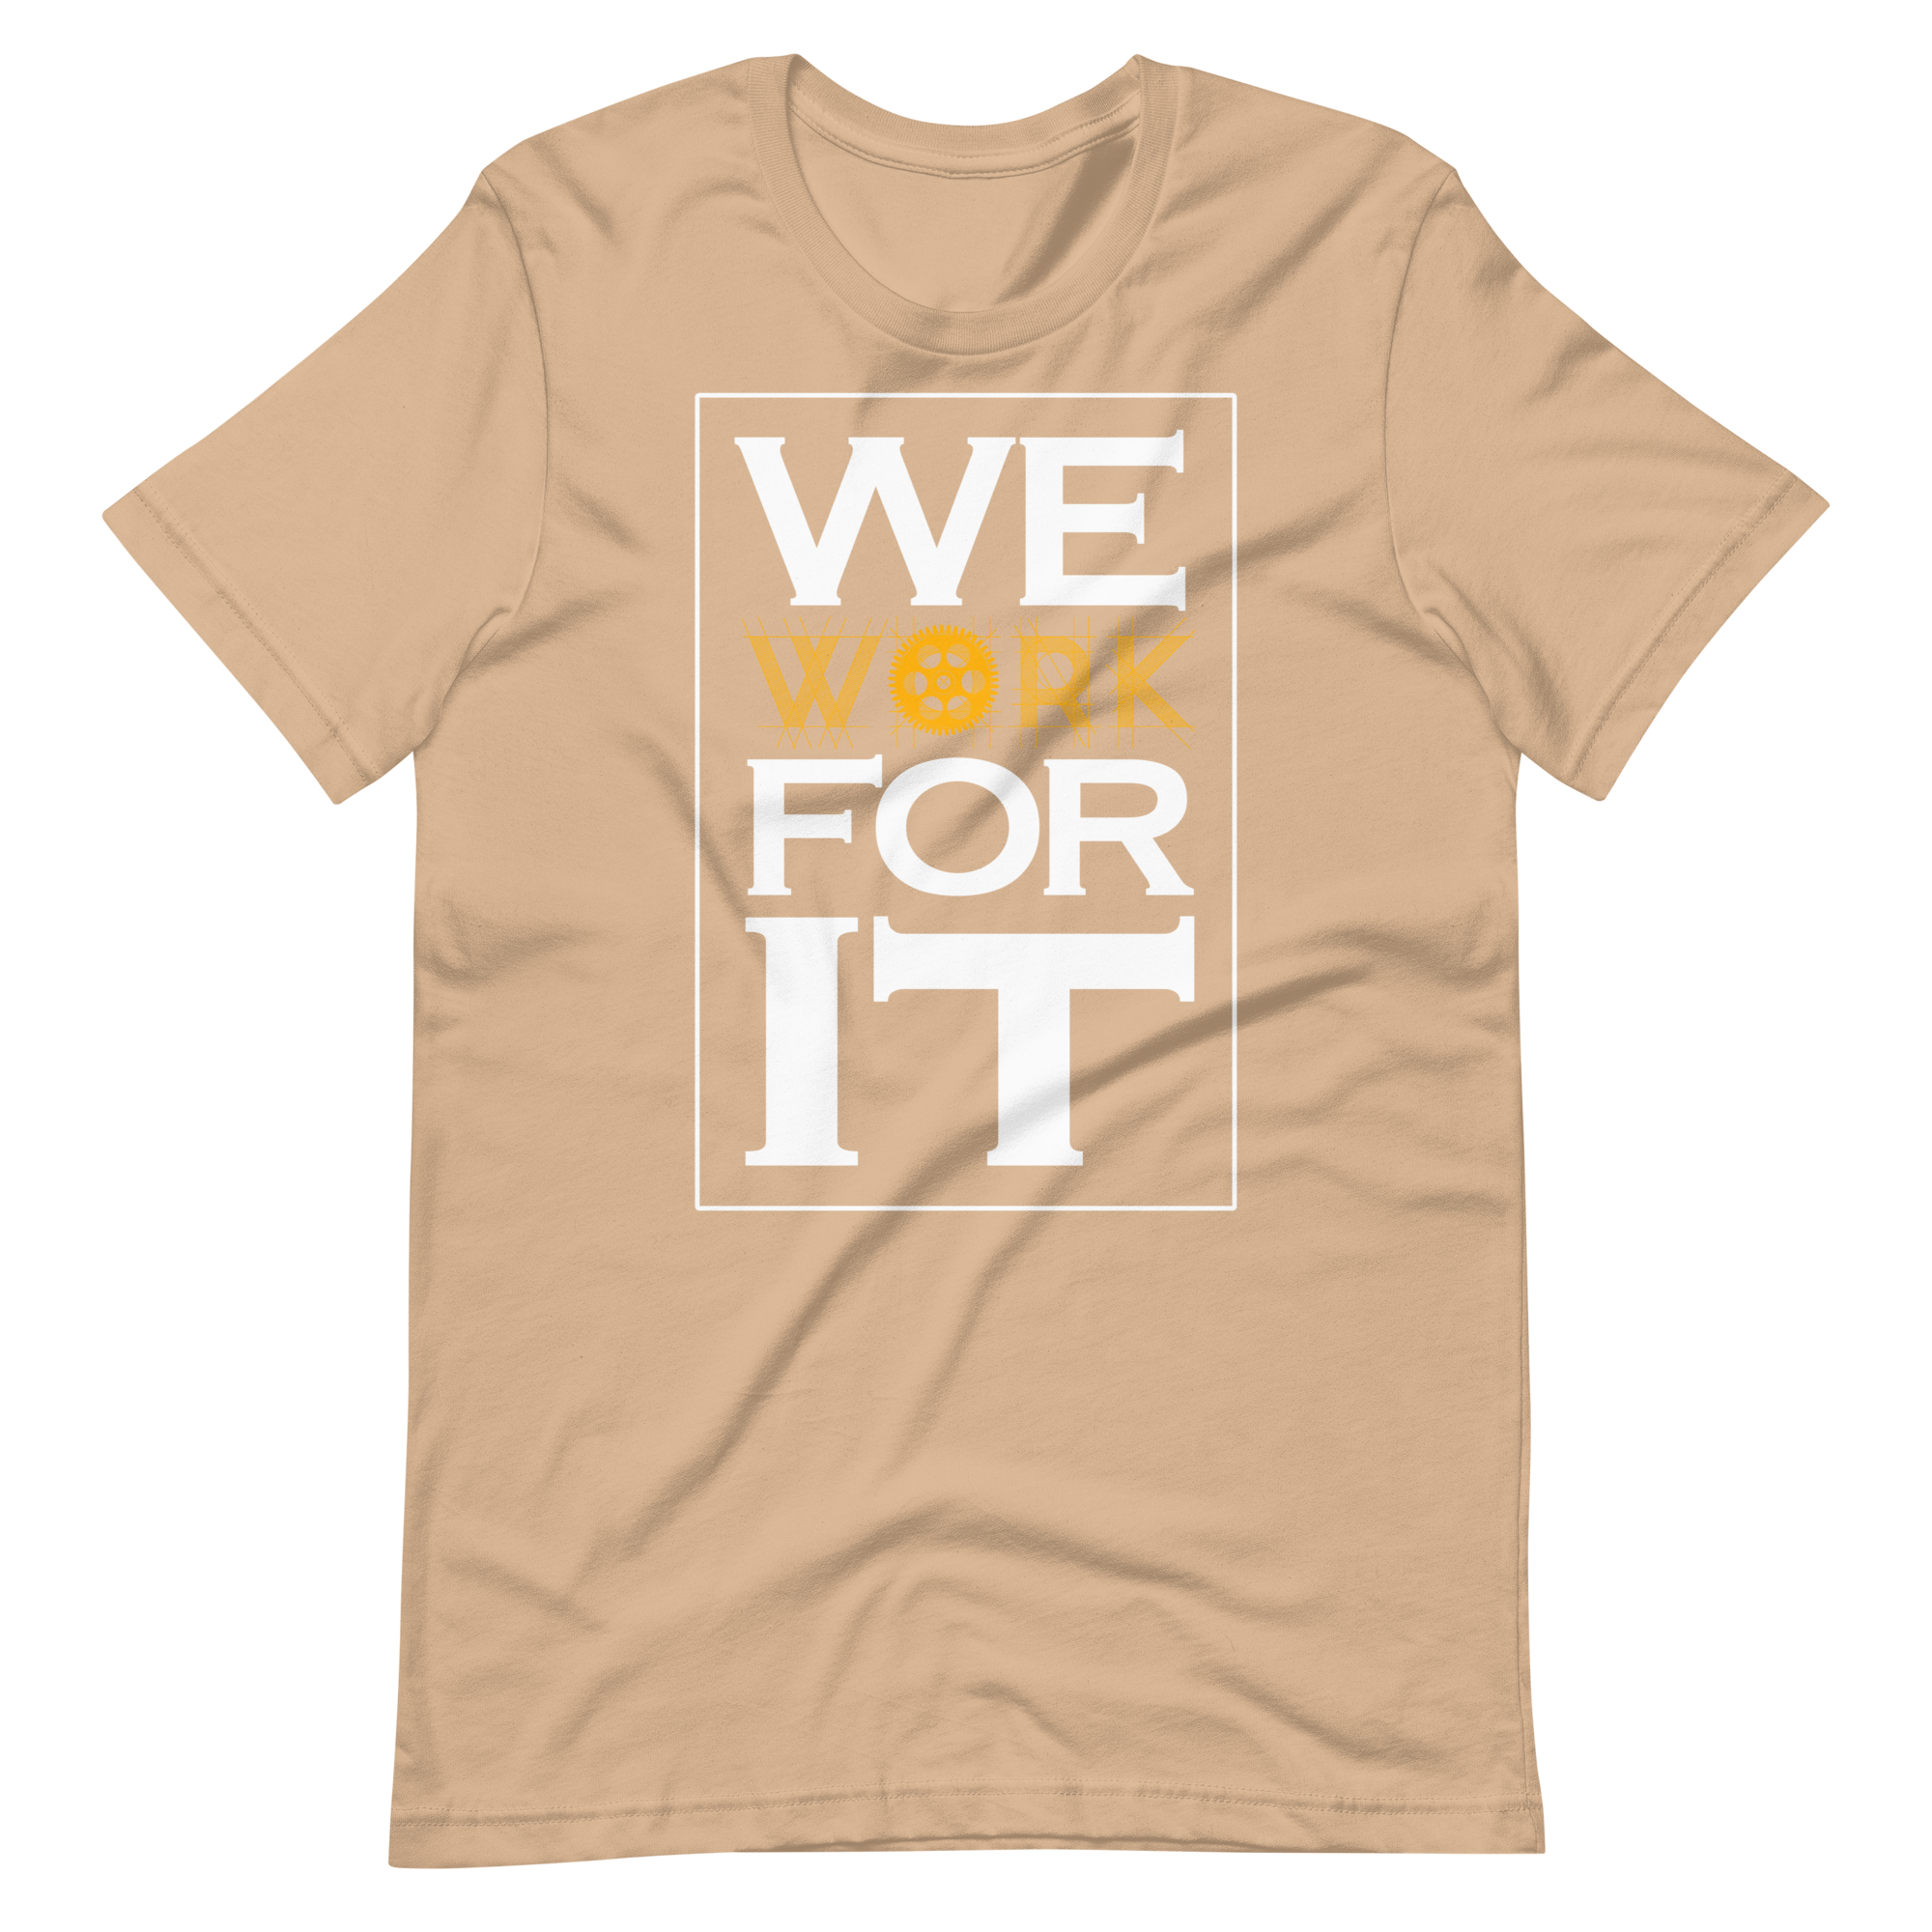 WE WORK FOR IT Tee